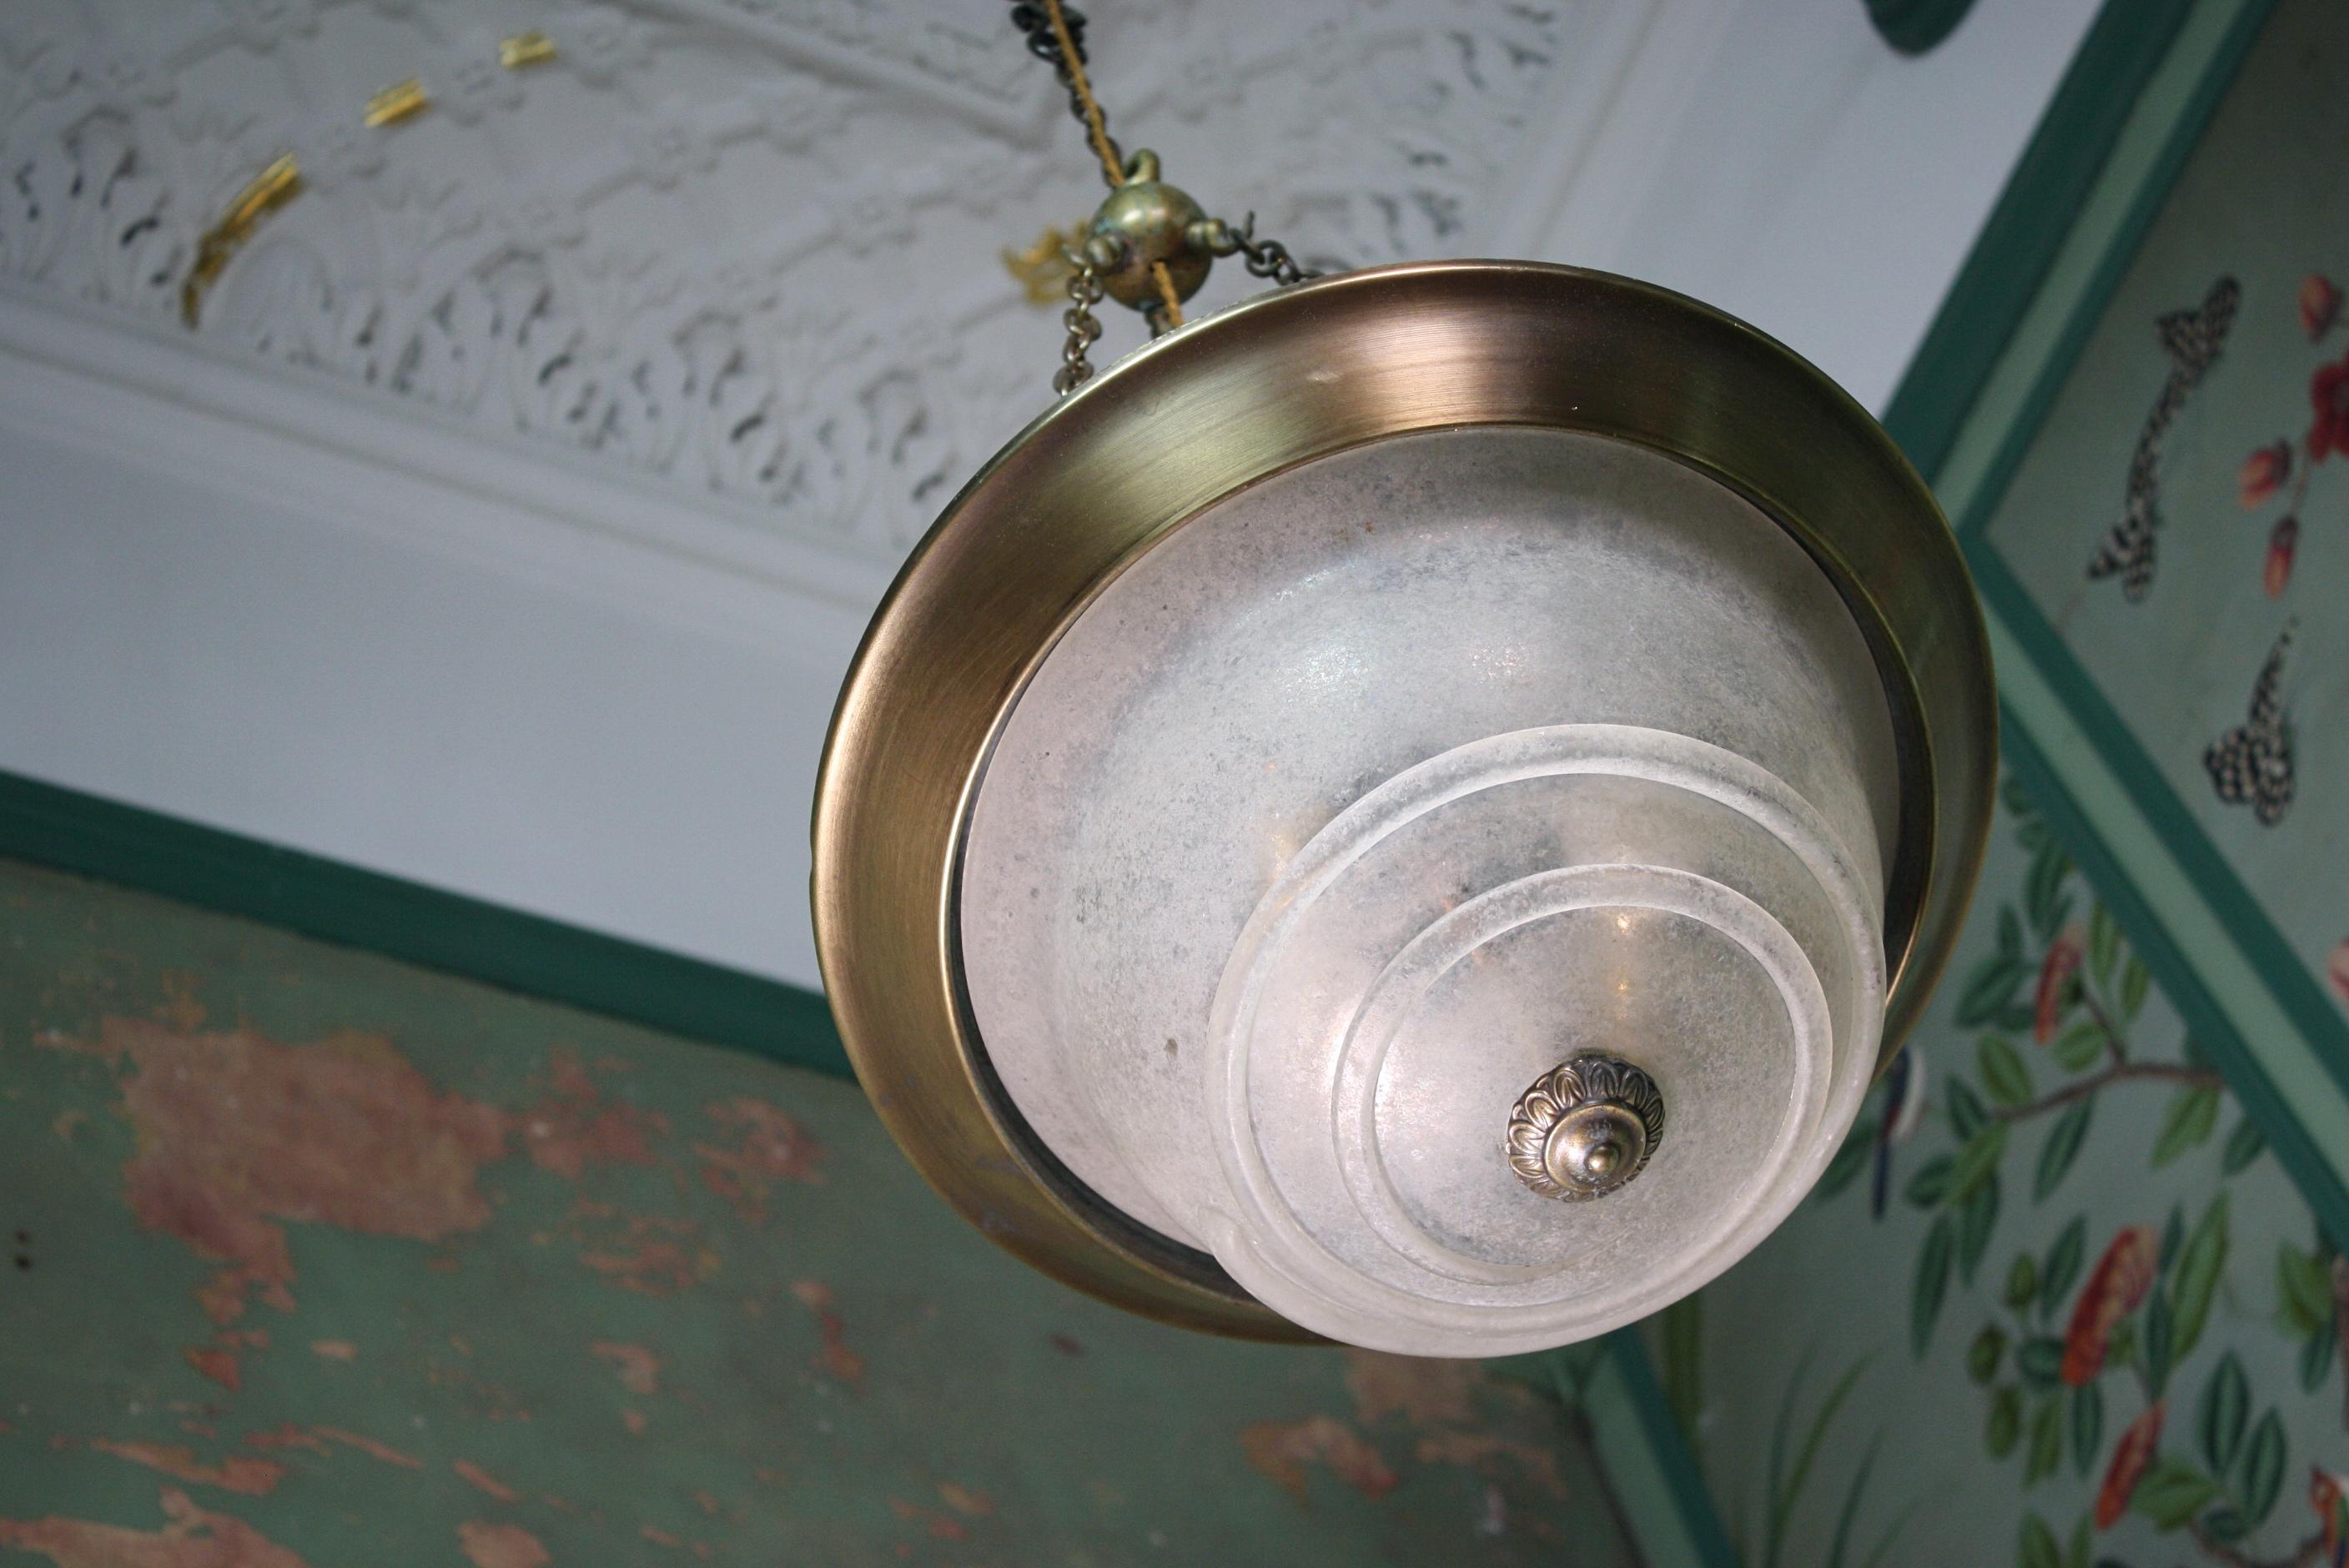 A very unusual 20th century (third quarter) plafonnier pendant in the neoclassical style, with a deep dish thick glass bowl and applied glass spiral decoration. Likely would off originally been flush mounted to an outdoor ceiling or wall and have at